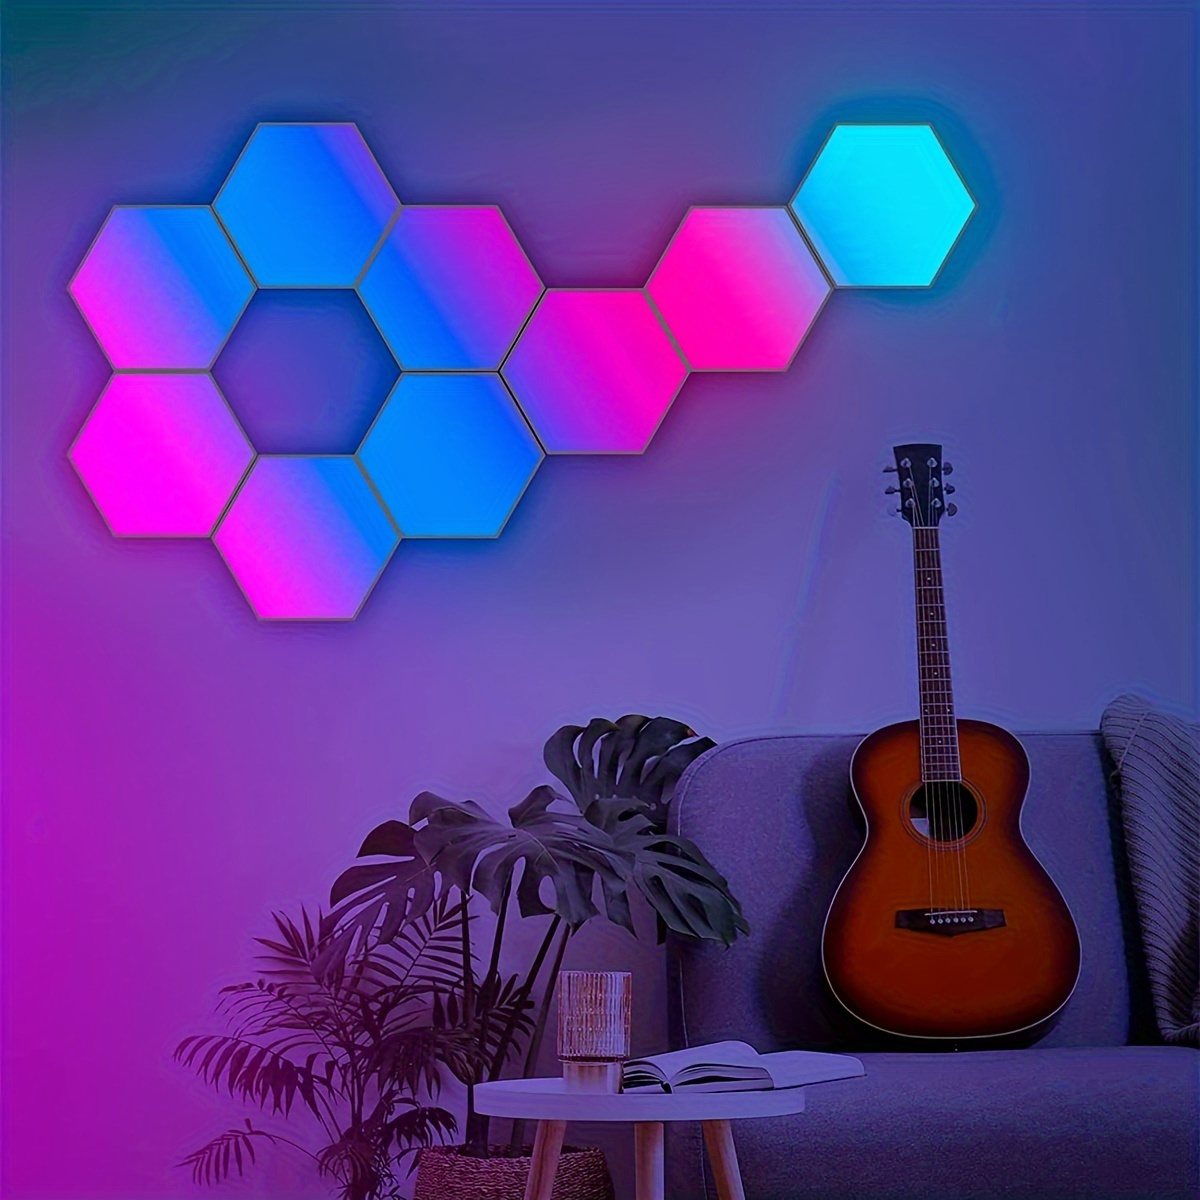 10 pack smart hexagon lights diy hexagon led light with app remote control music sync rgbic wall light panels for gaming room bedroom living room decor details 5